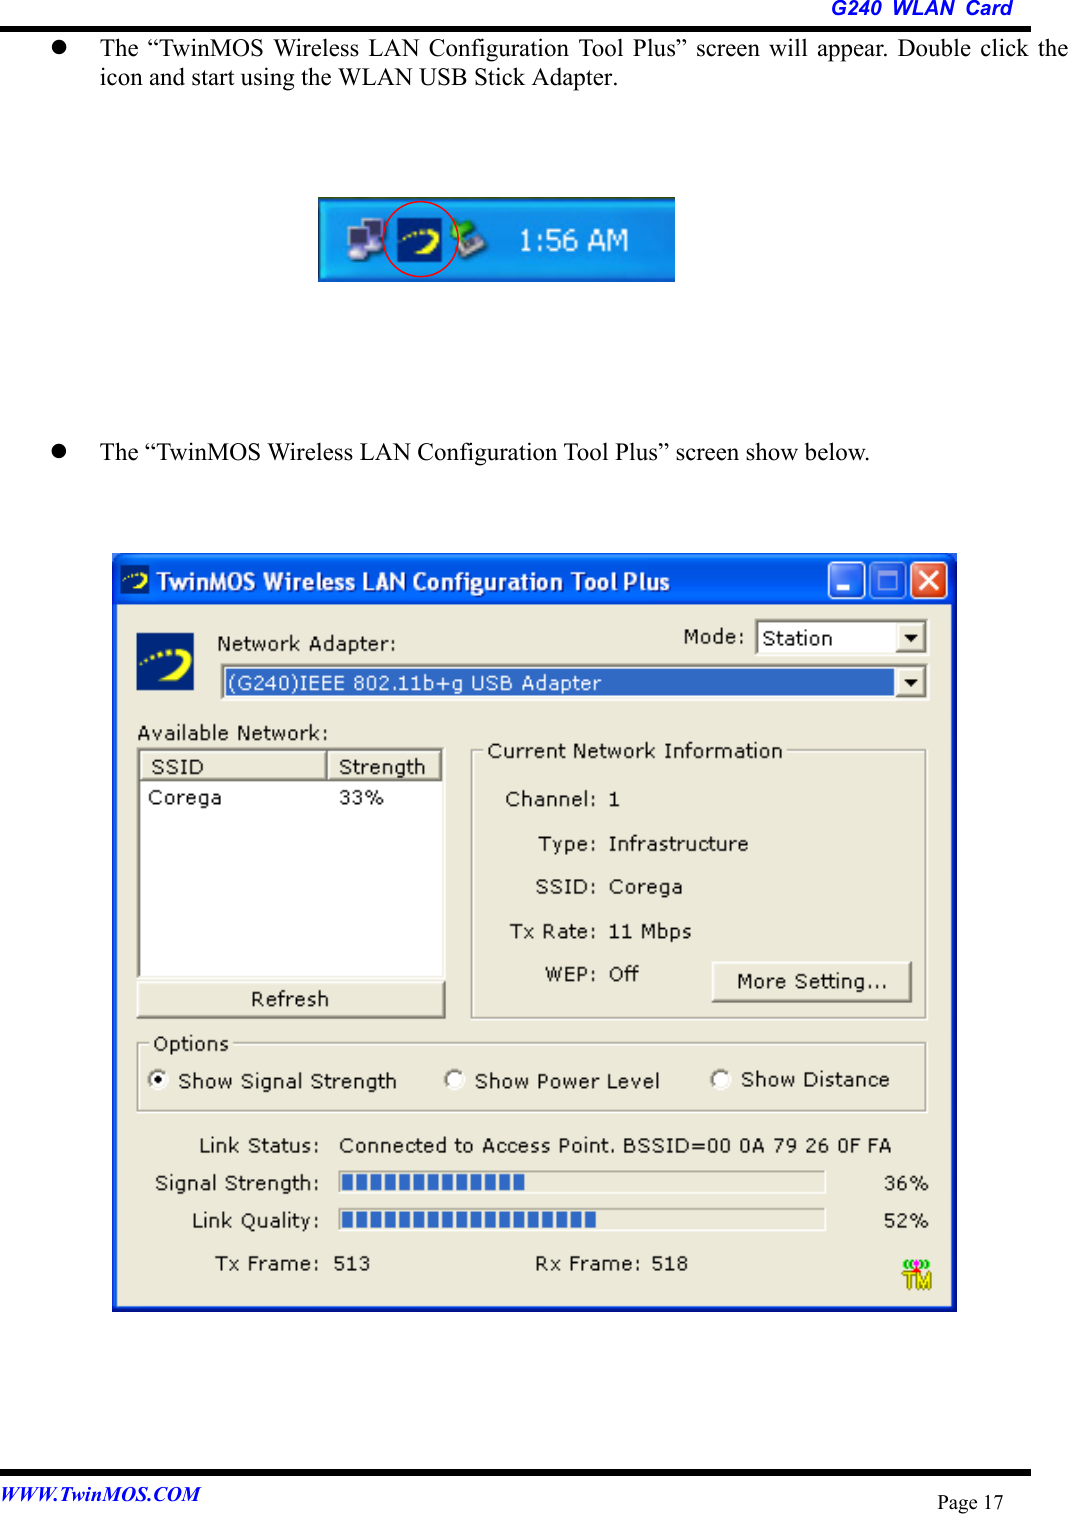   G240 WLAN Card WWW.TwinMOS.COM  Page 17  The “TwinMOS Wireless LAN Configuration Tool Plus” screen will appear. Double click the icon and start using the WLAN USB Stick Adapter.           The “TwinMOS Wireless LAN Configuration Tool Plus” screen show below.                        